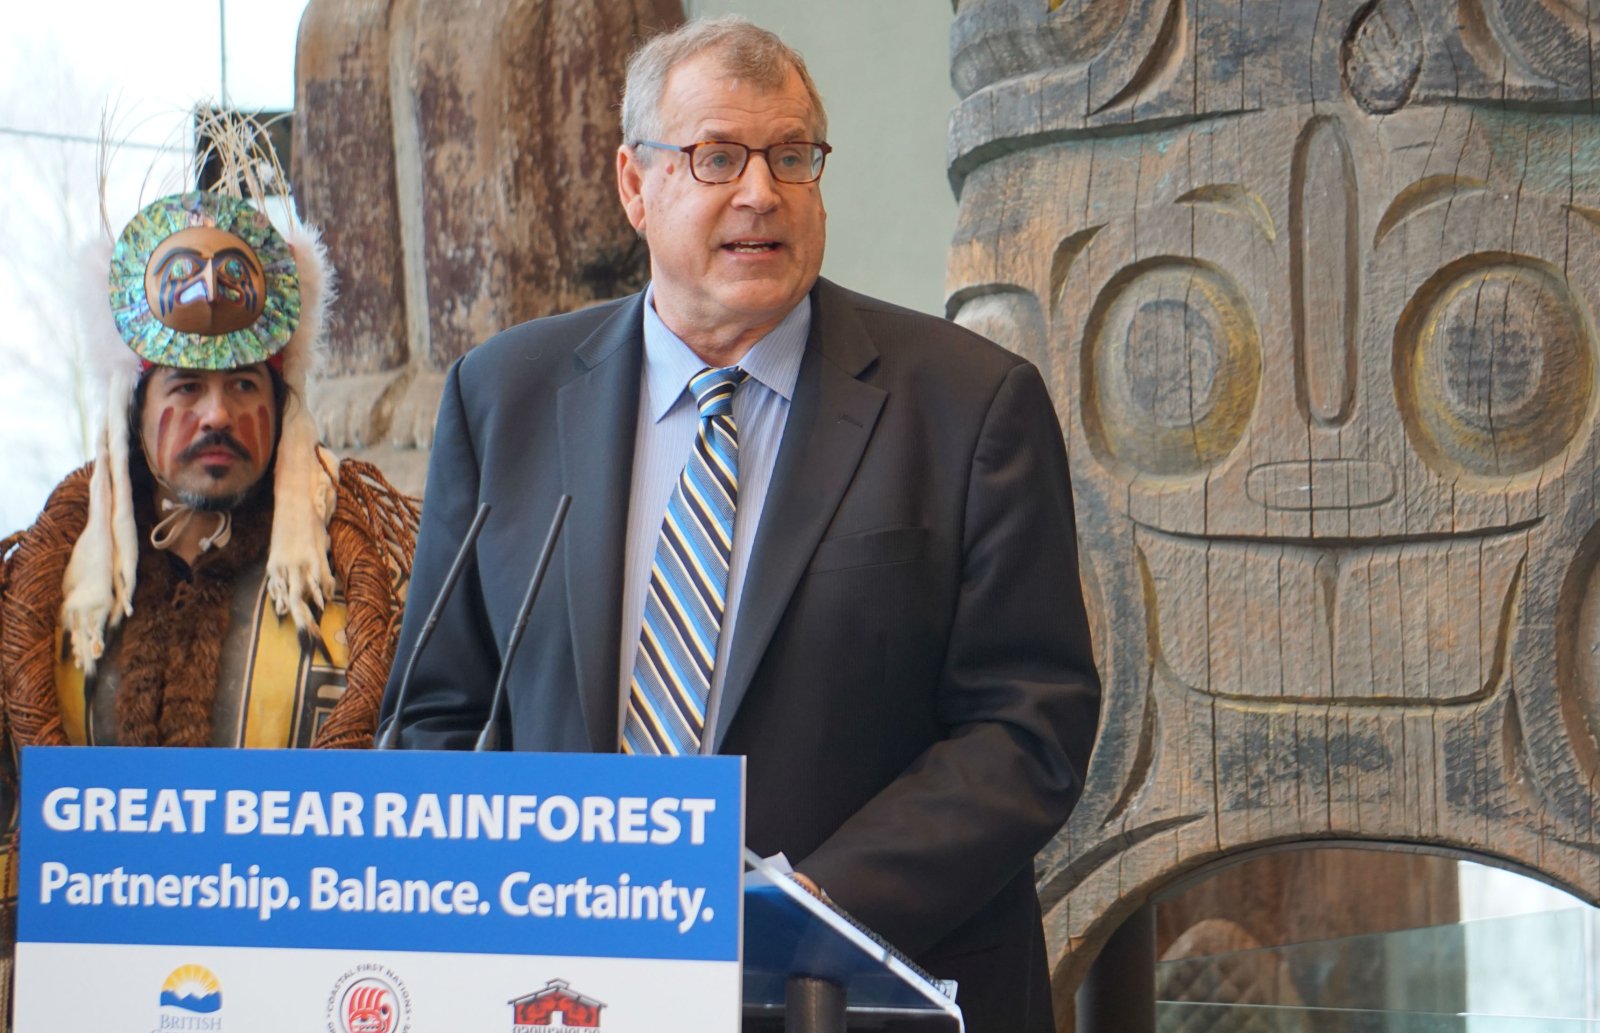 Ministry of Forests, Lands and Natural Resource Operations, Great Bear Rainforest, trophy hunt, grizzly bear hunt